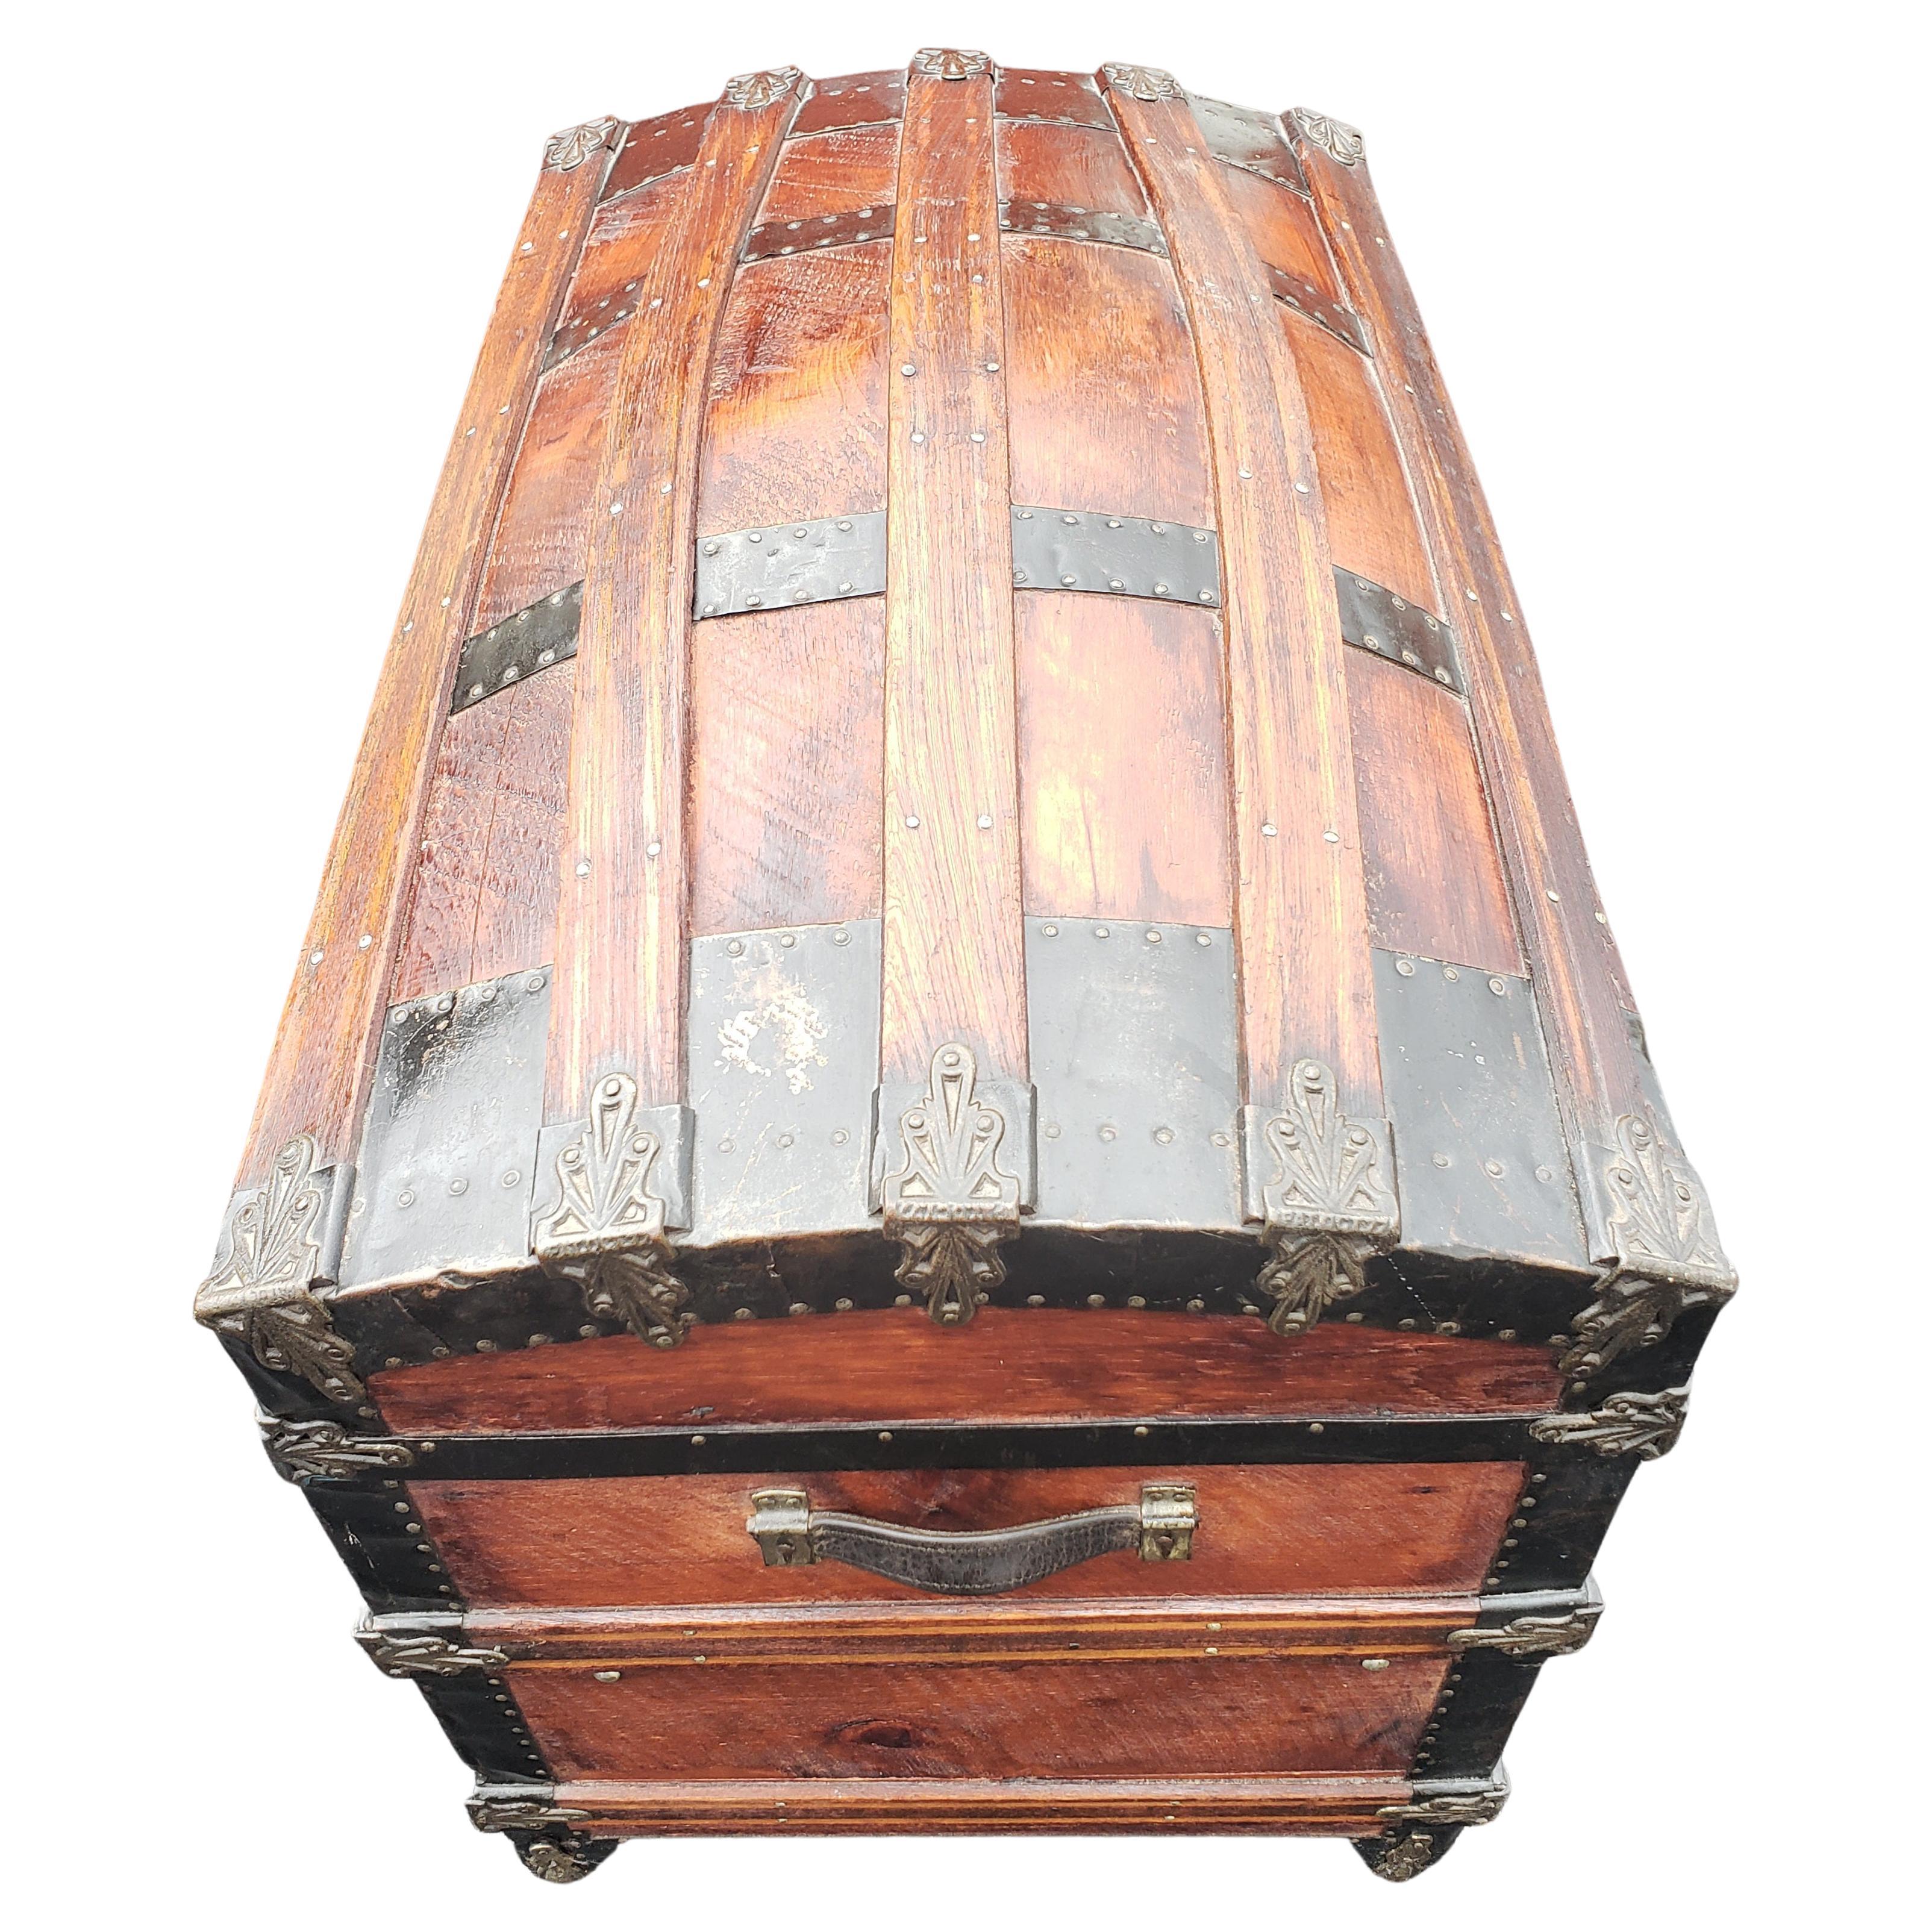 dome top trunk